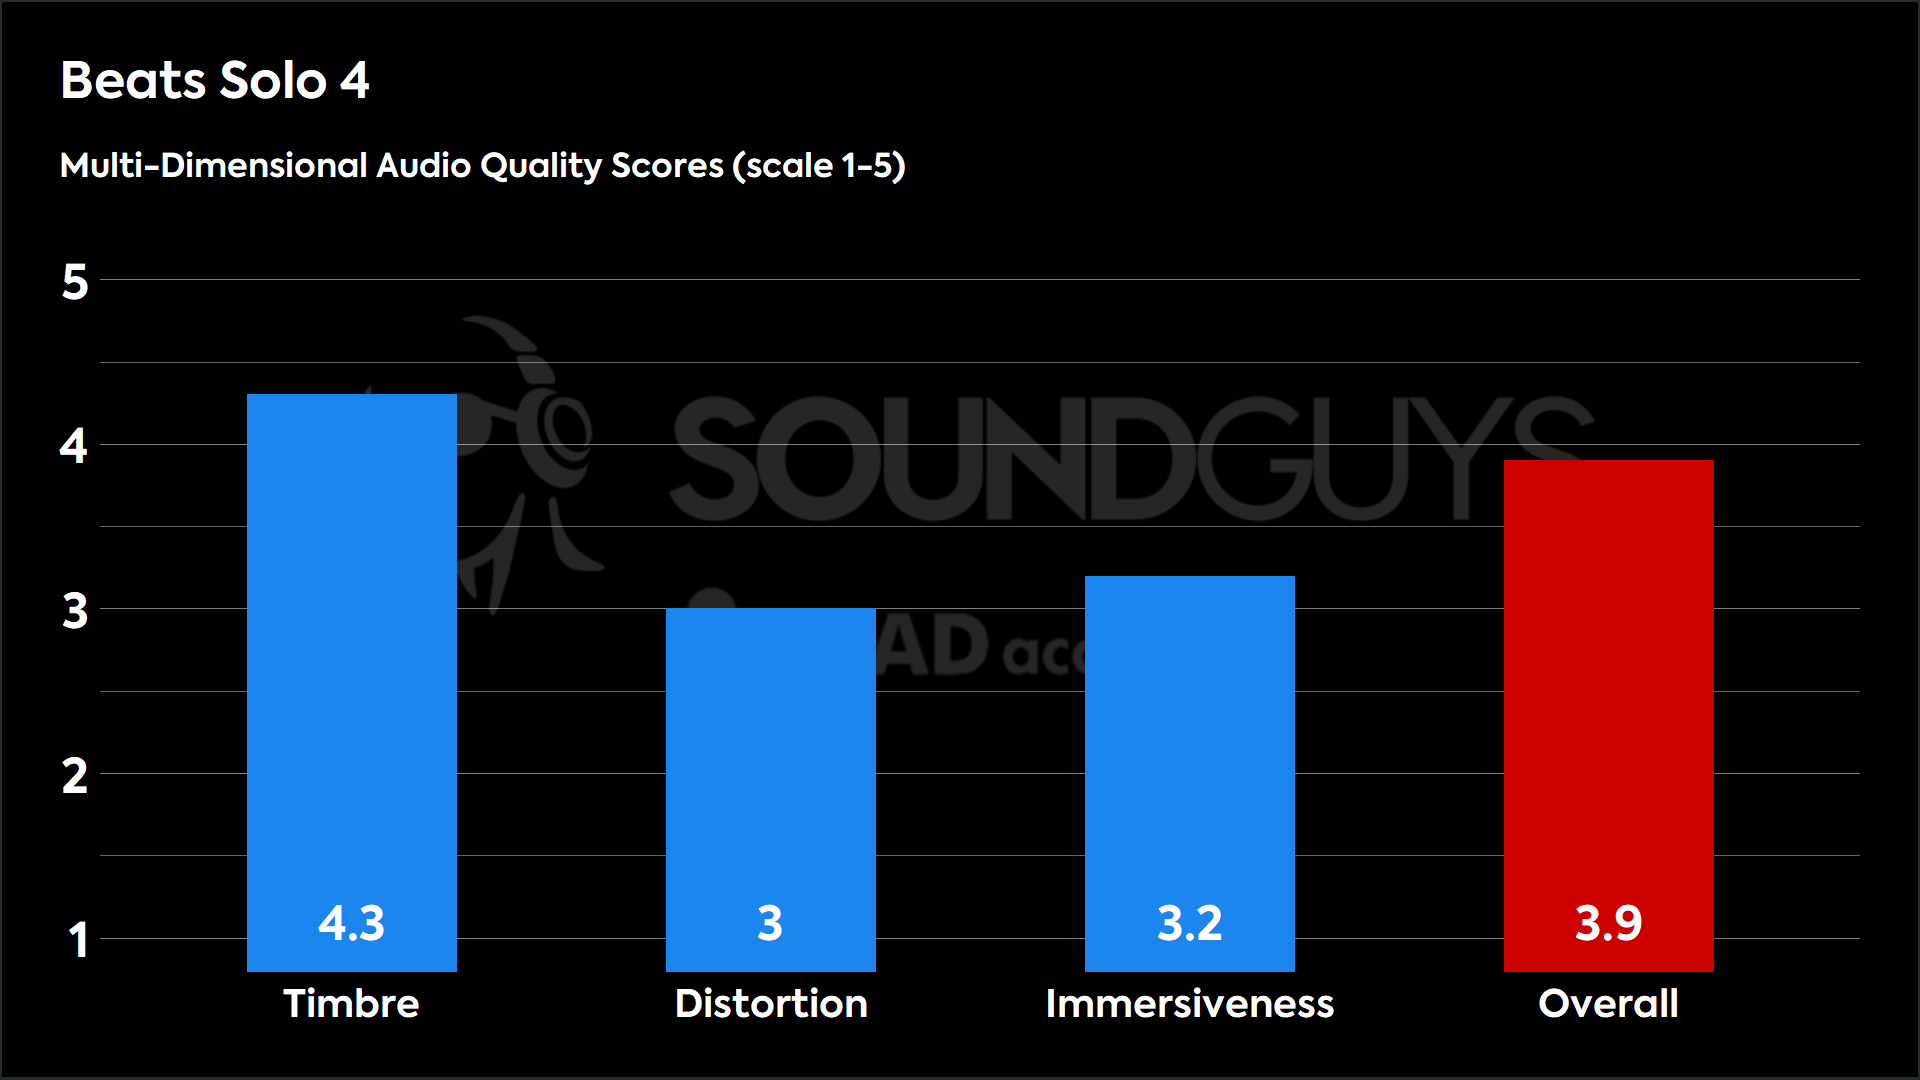 This chart shows the MDAQS results for the Beats Solo 4 in Default mode. The Timbre score is 4.3, The Distortion score is 3, the Immersiveness score is 3.2, and the Overall Score is 3.9).